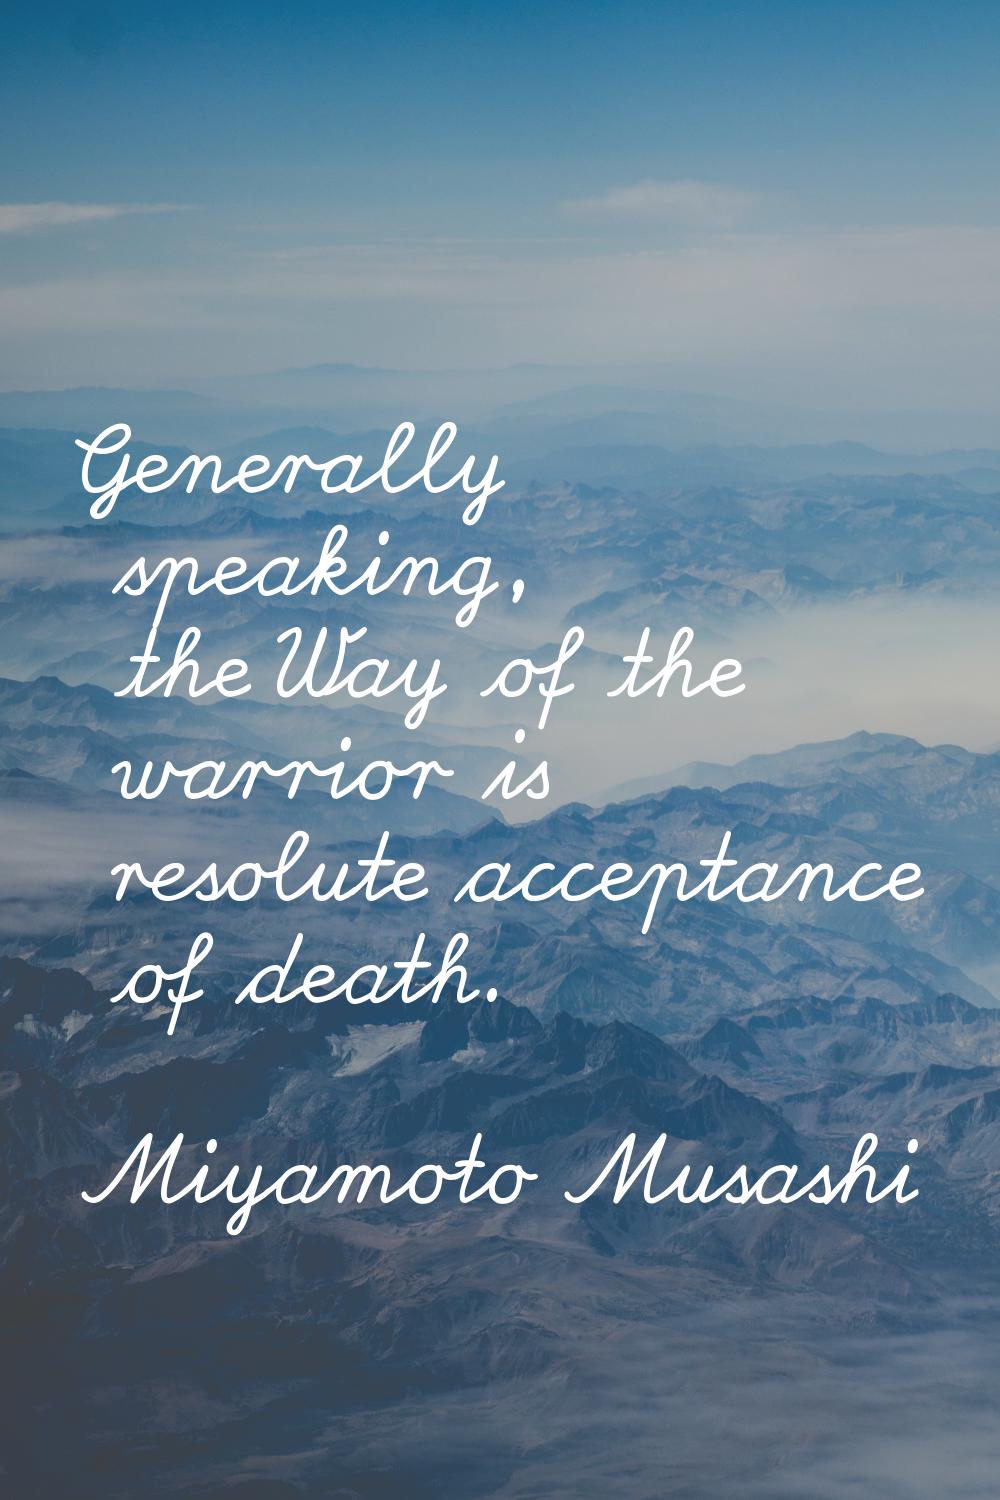 Generally speaking, the Way of the warrior is resolute acceptance of death.